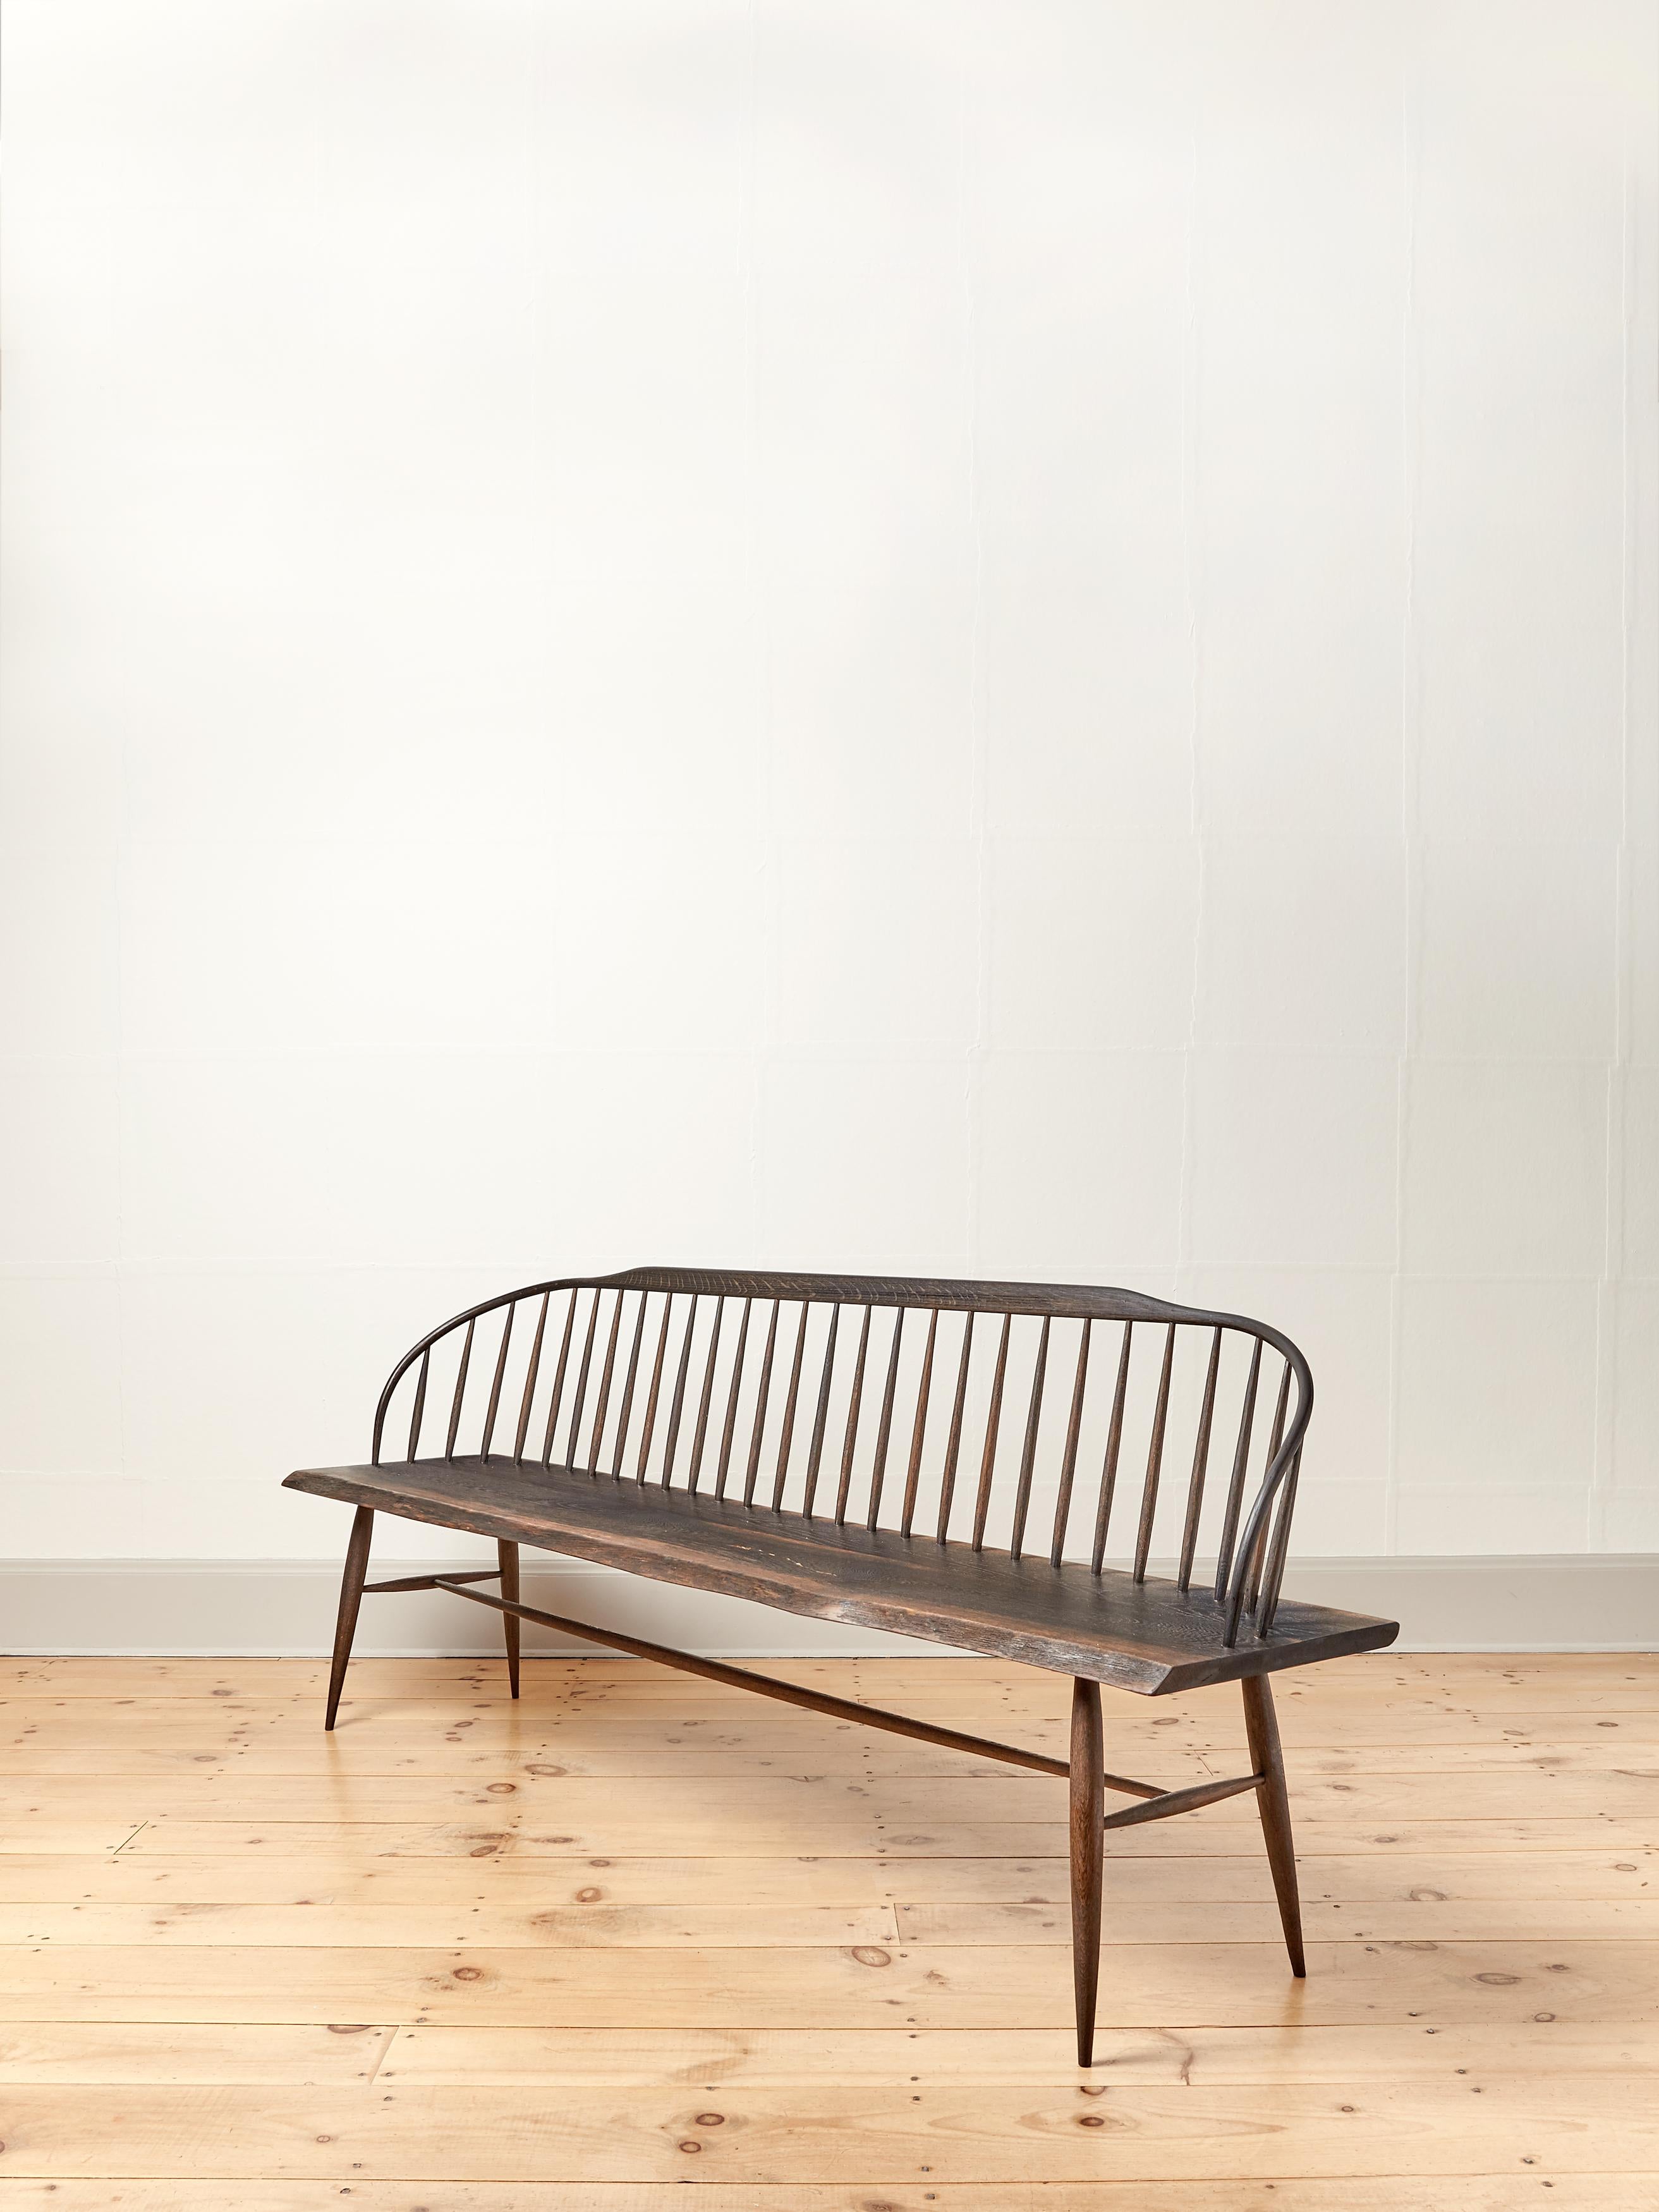 The elegant steam bent back curves into the subtle live edge seat to form the arms at each end of this modern take on a spindle bench. The spindles, legs and rails are turned and carved into graceful tapers. The length of the bench shows off these